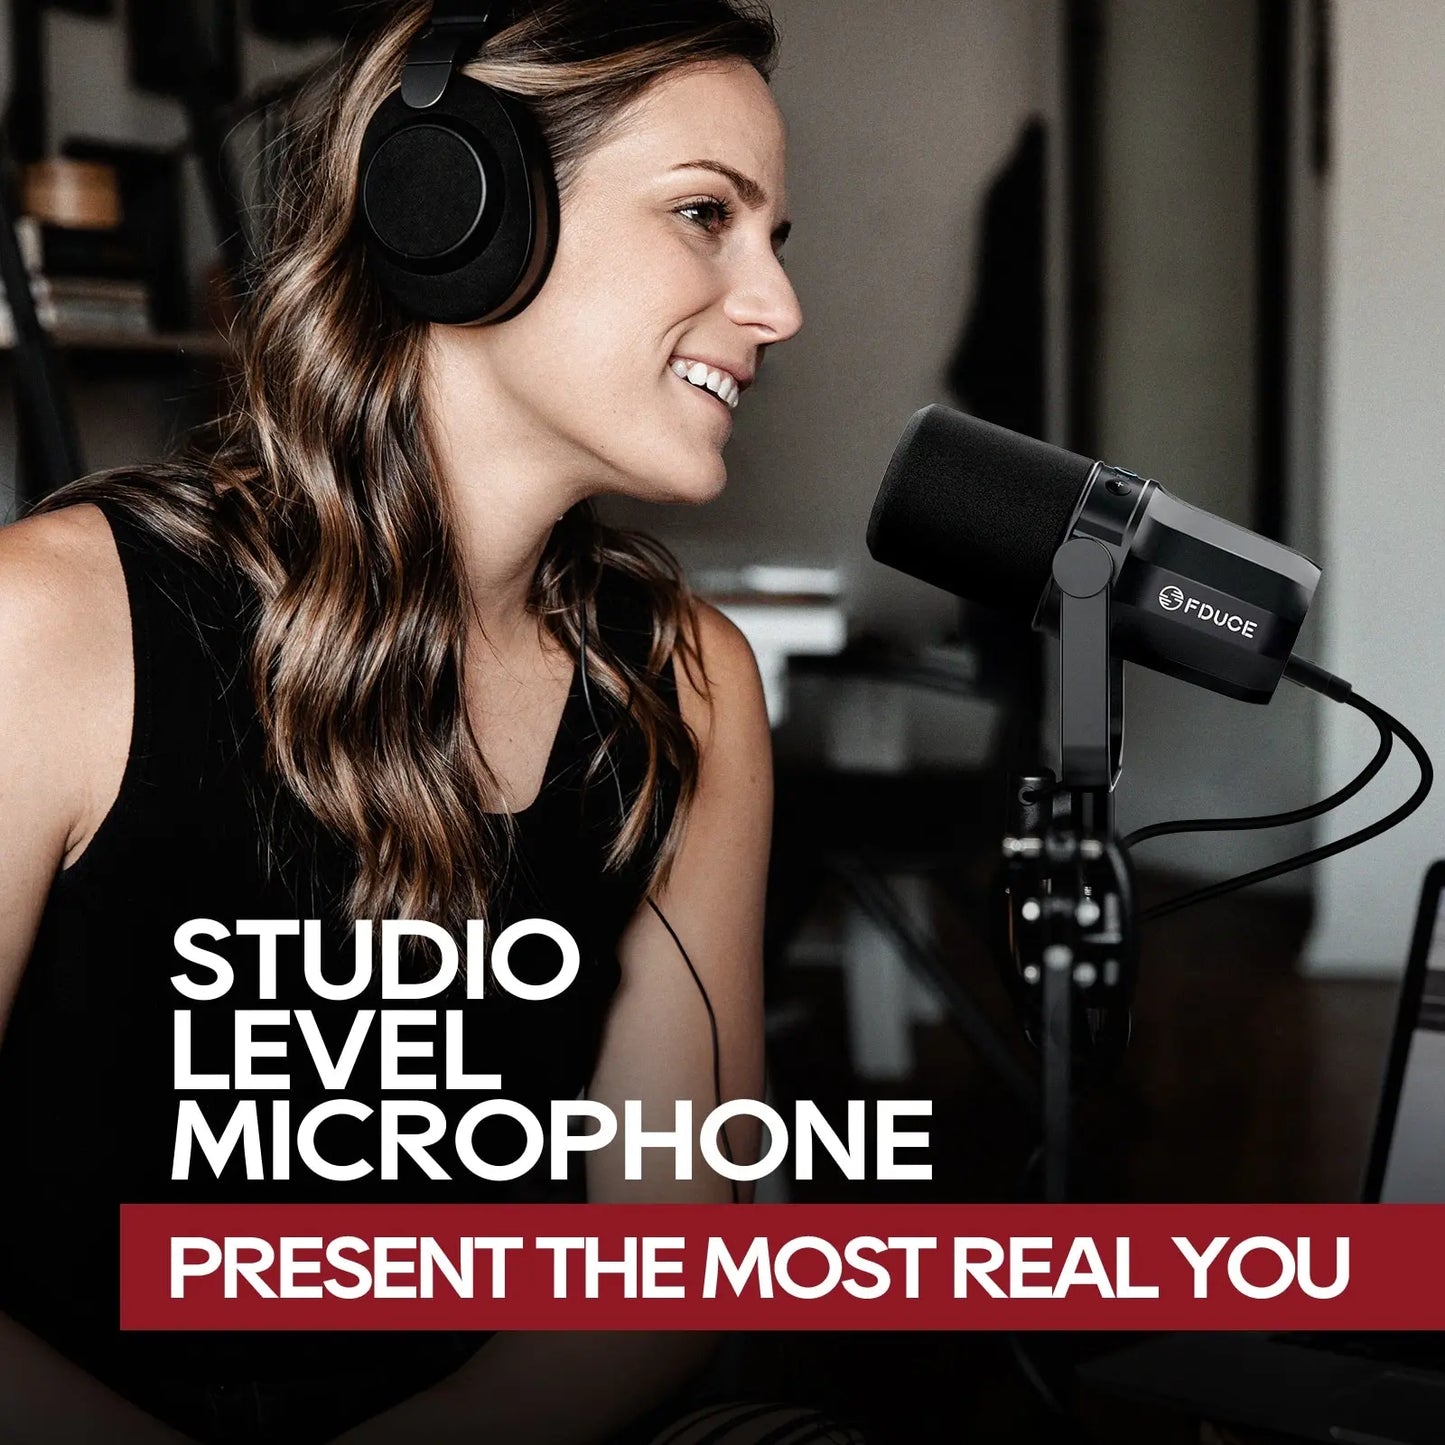 FDUCE Dynamic Microphone SL40X/SL40 Metal Built-in Headset Output Sound Insulation For Podcasts,Live Broadcast and Games